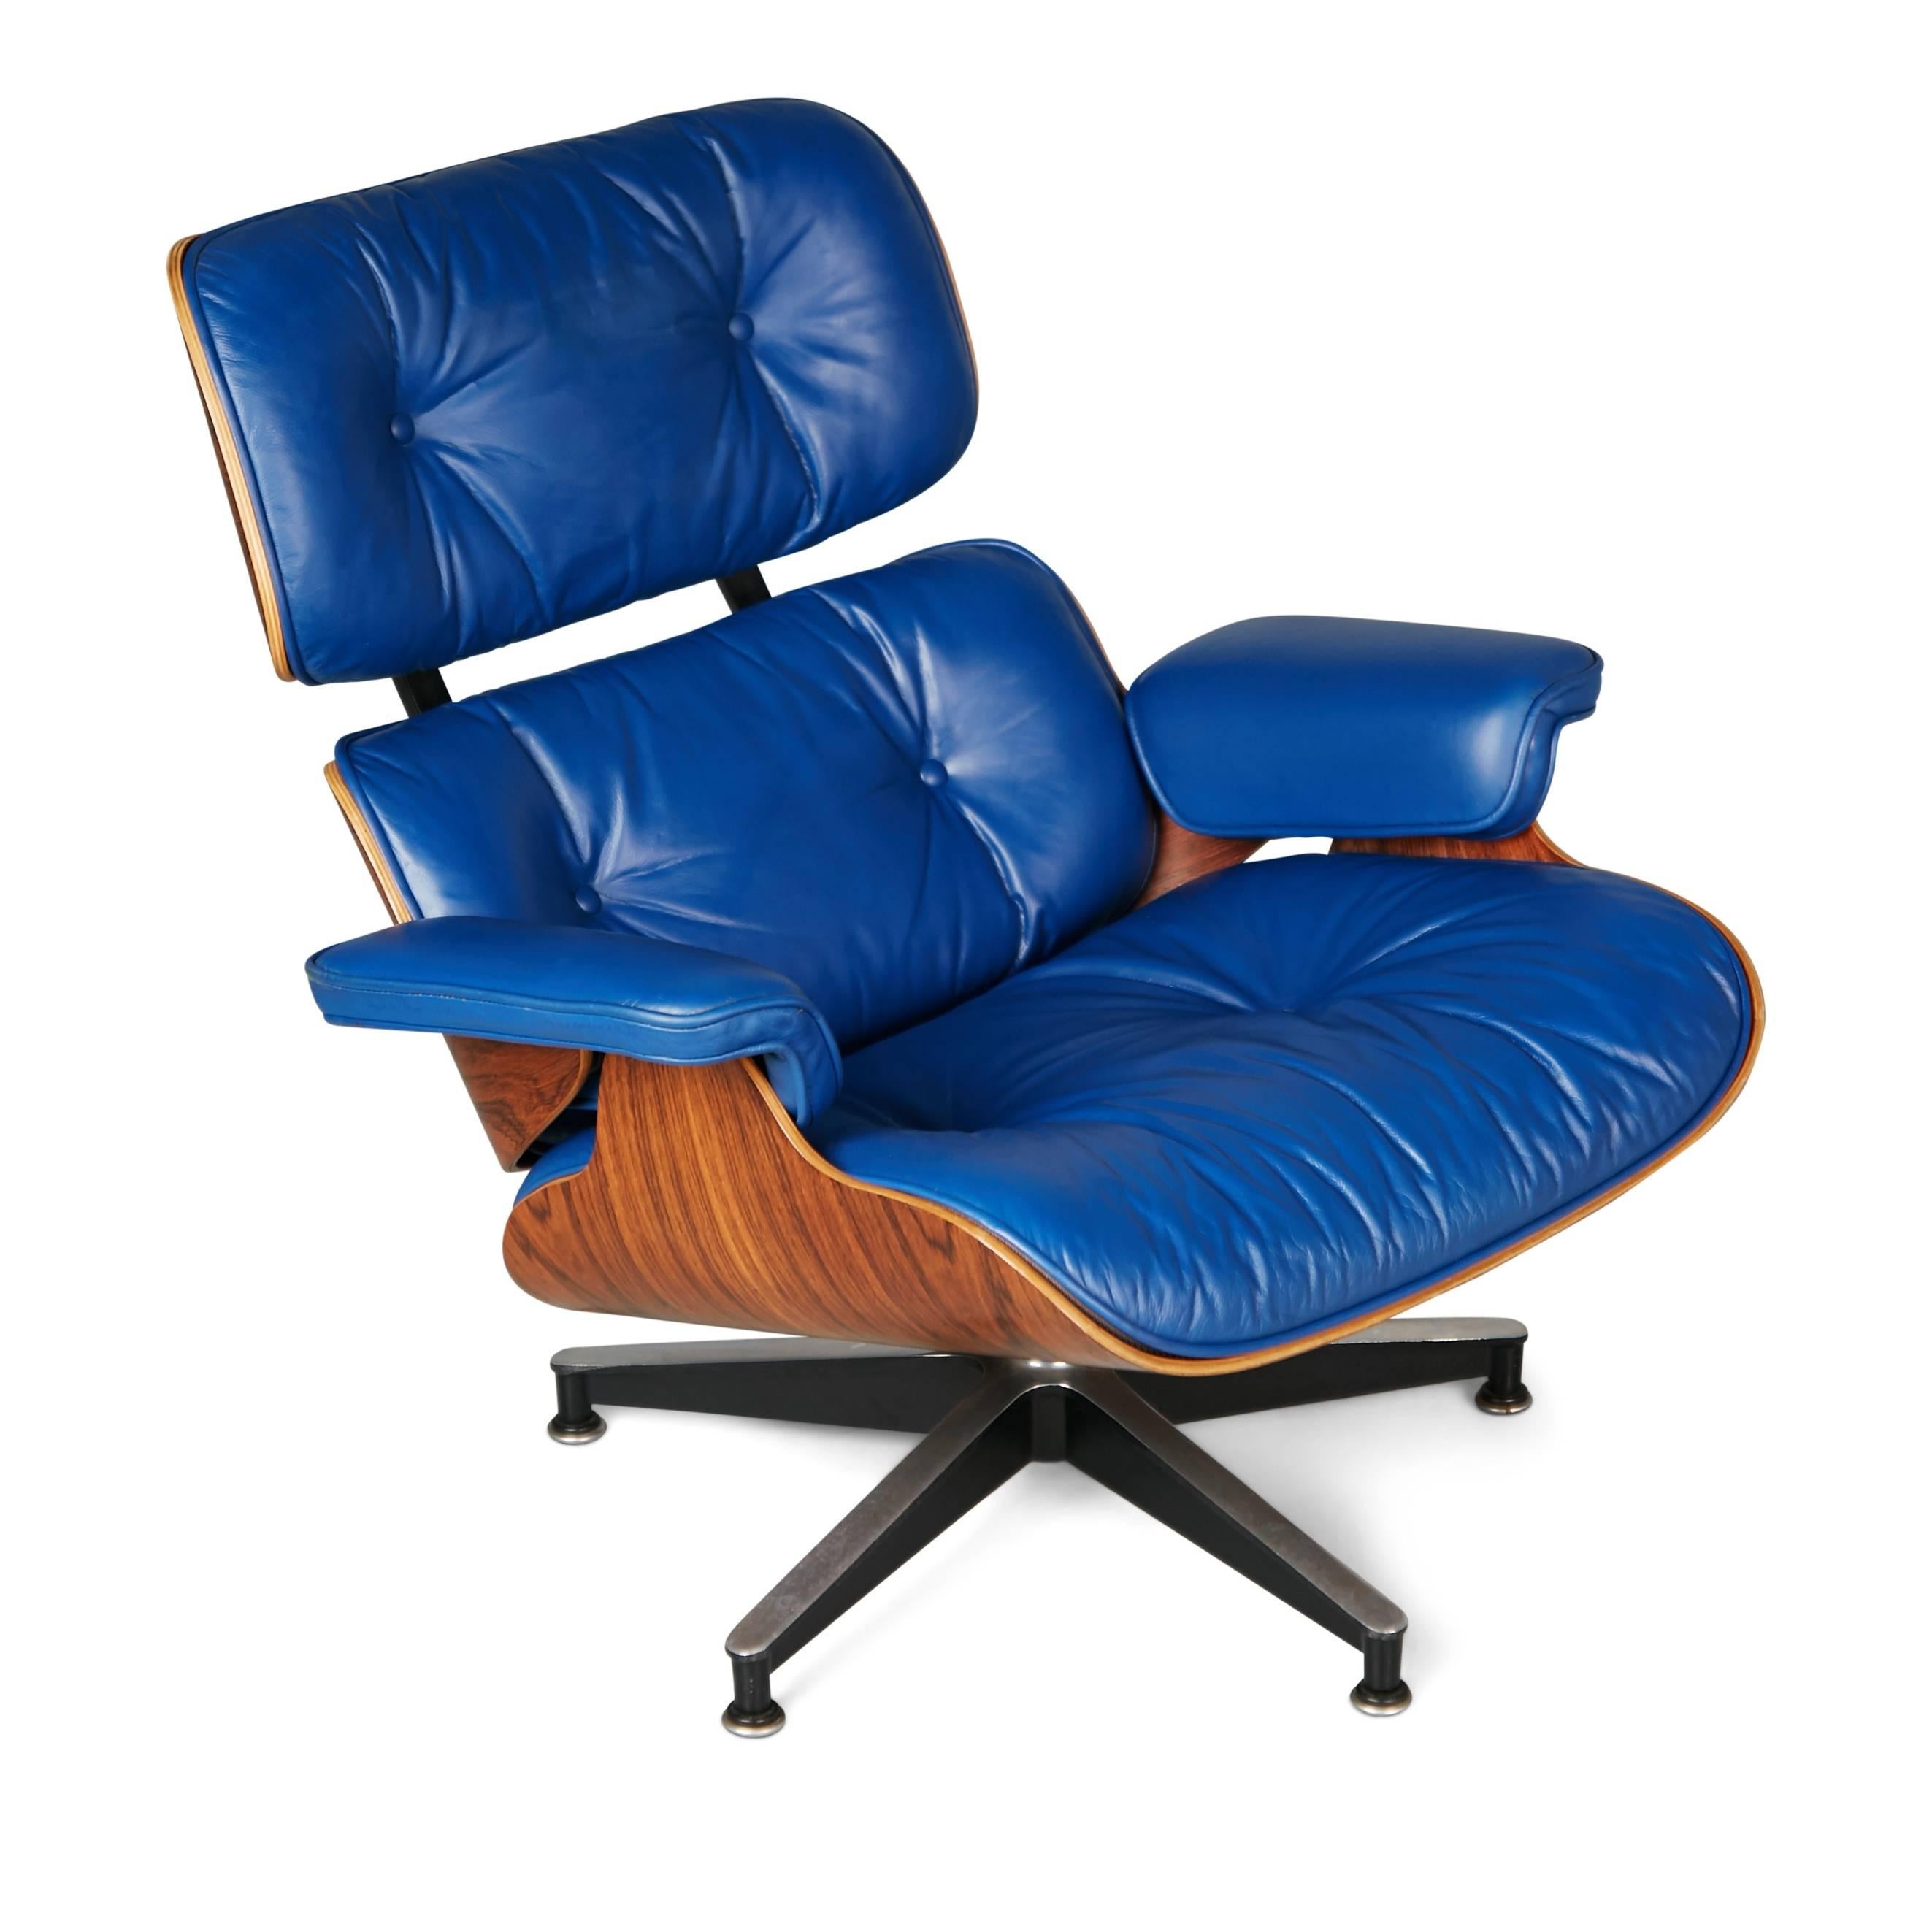 A rare early production find indeed, this Charles and Ray Eames for Herman Miller Model 670 lounge chair with Brazilian rosewood and vibrant azure blue leather, which was a rare special order option in the early 1960s. Circular black Herman Miller